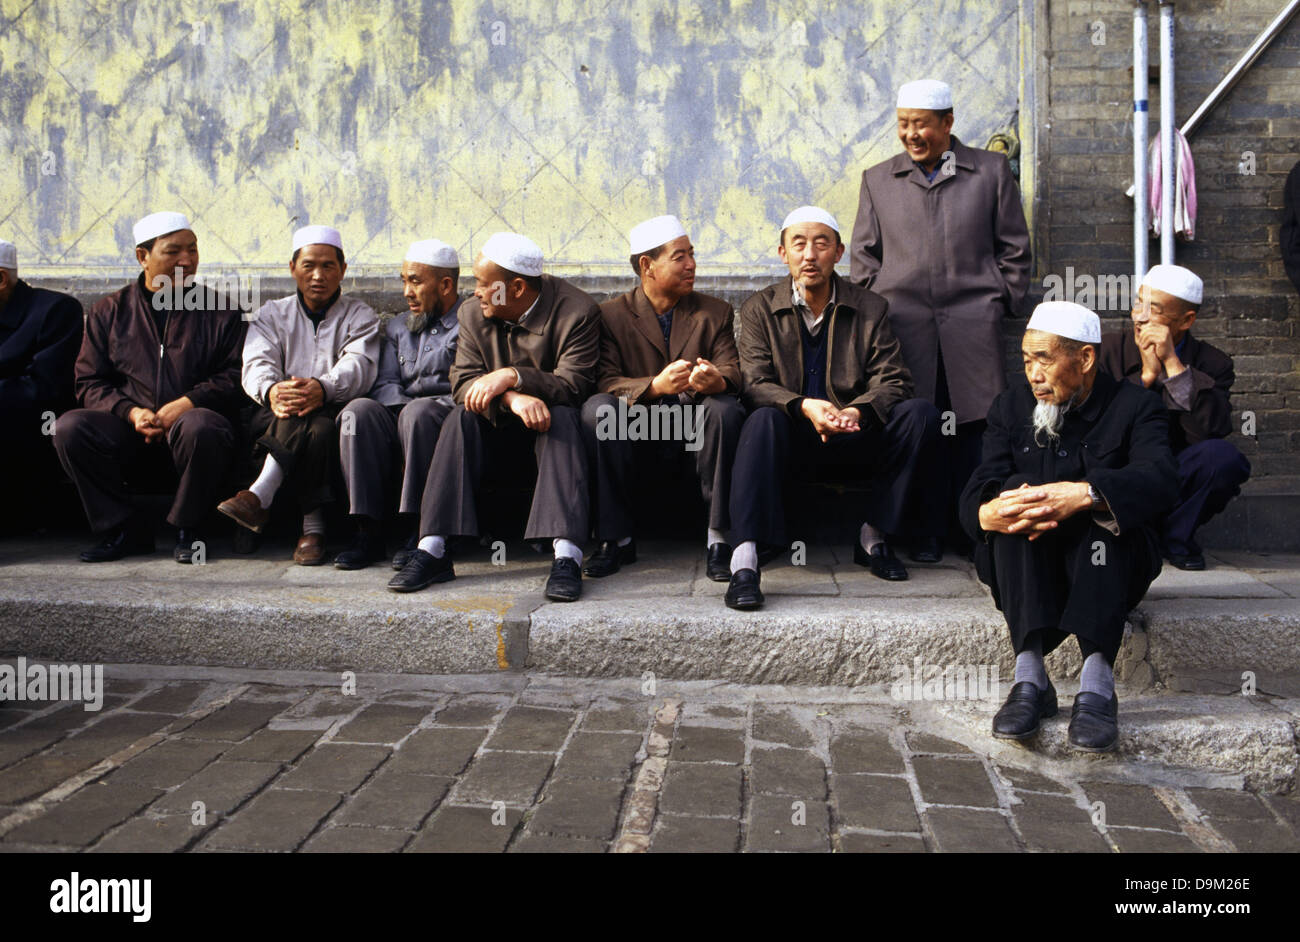 Hui Muslims men in the courtyard of Dongguan Grand Mosque originally built in 1380 in Xining the capital of Qinghai province in western China Stock Photo